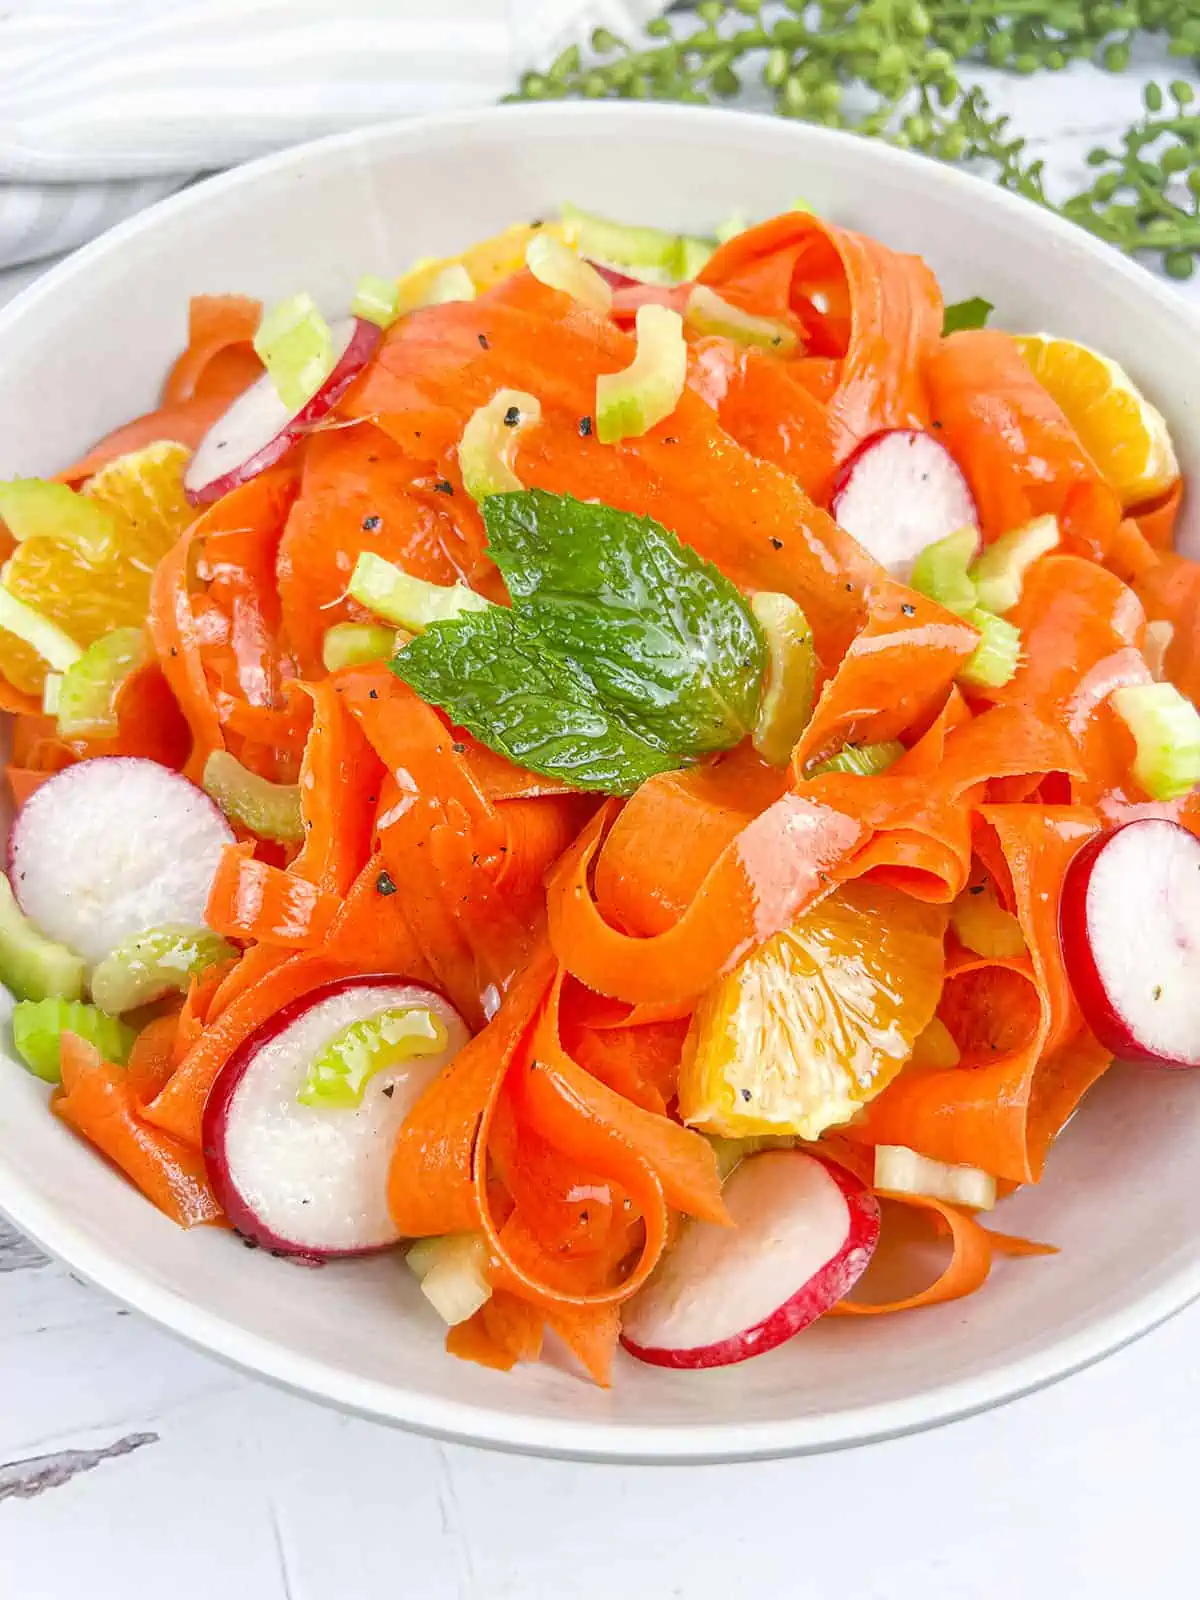 Shaved carrots, radishes, orange segments, celery and mint leaves all in a white bowl with dressing over top.